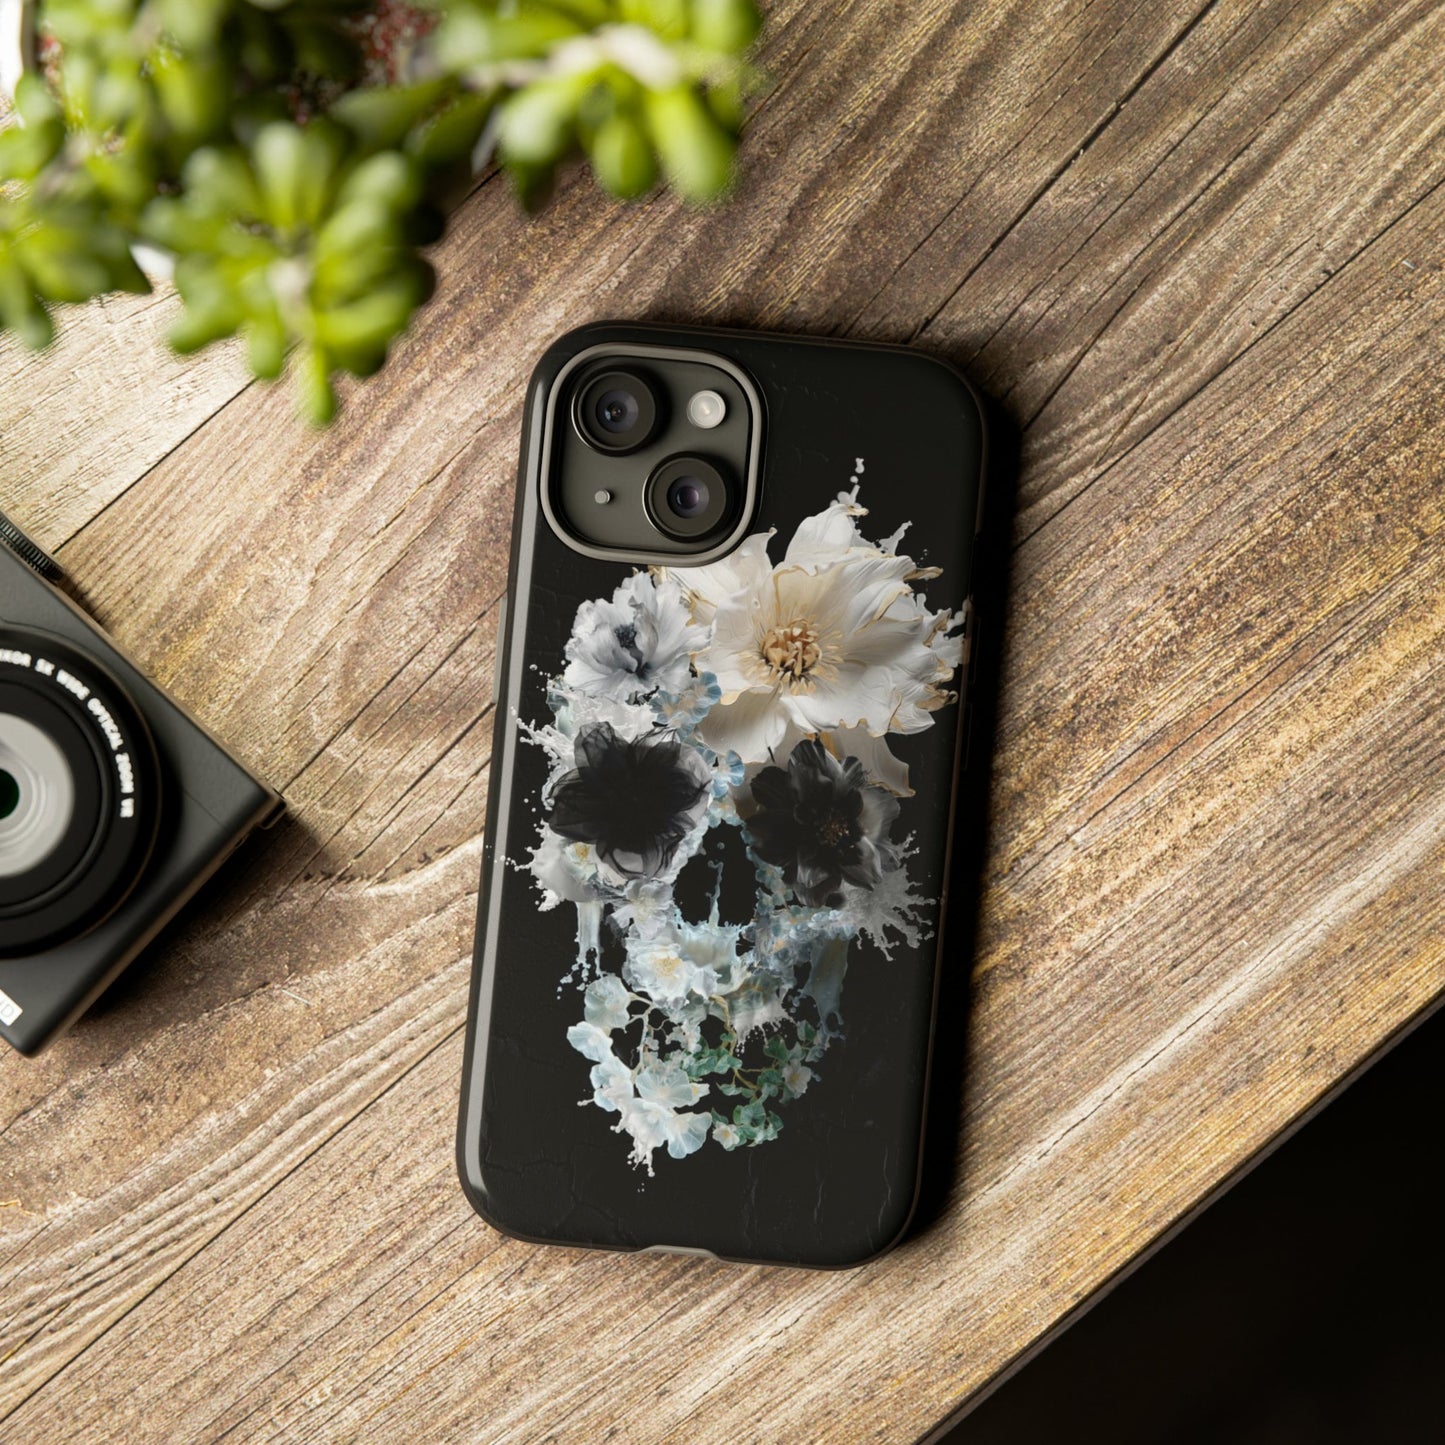 Bloom iPhone 15 Case, Floral Skull iPhone 14 Case, Sugar Skull Phone Case Gift, Skull Tough Phone Case, iPhone Gift